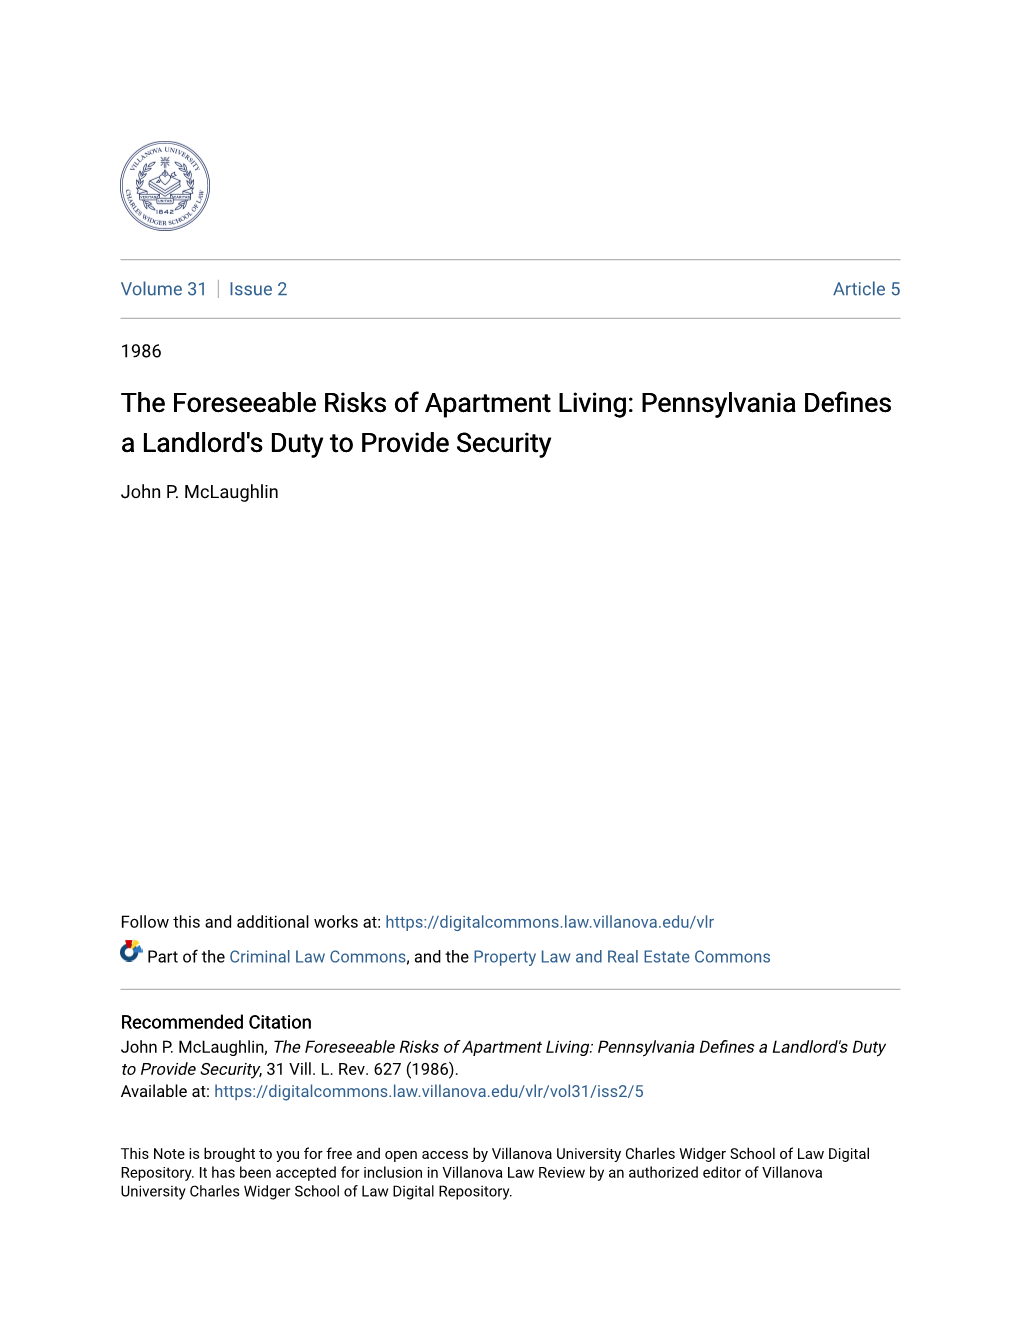 The Foreseeable Risks of Apartment Living: Pennsylvania Defines a Landlord's Duty to Provide Security